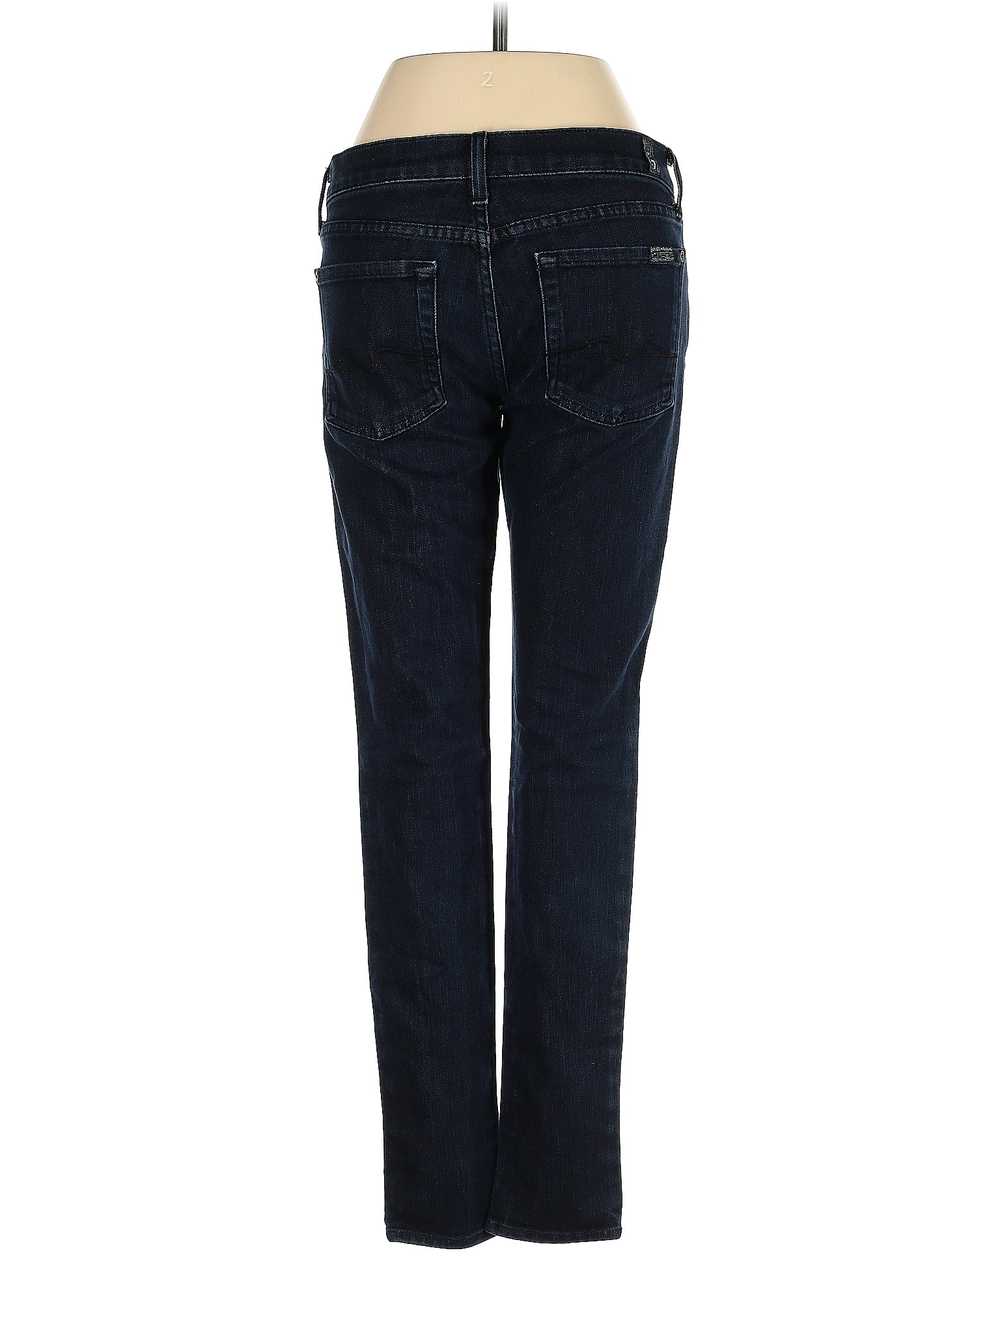 7 For All Mankind Women Blue Jeans 27W - image 2